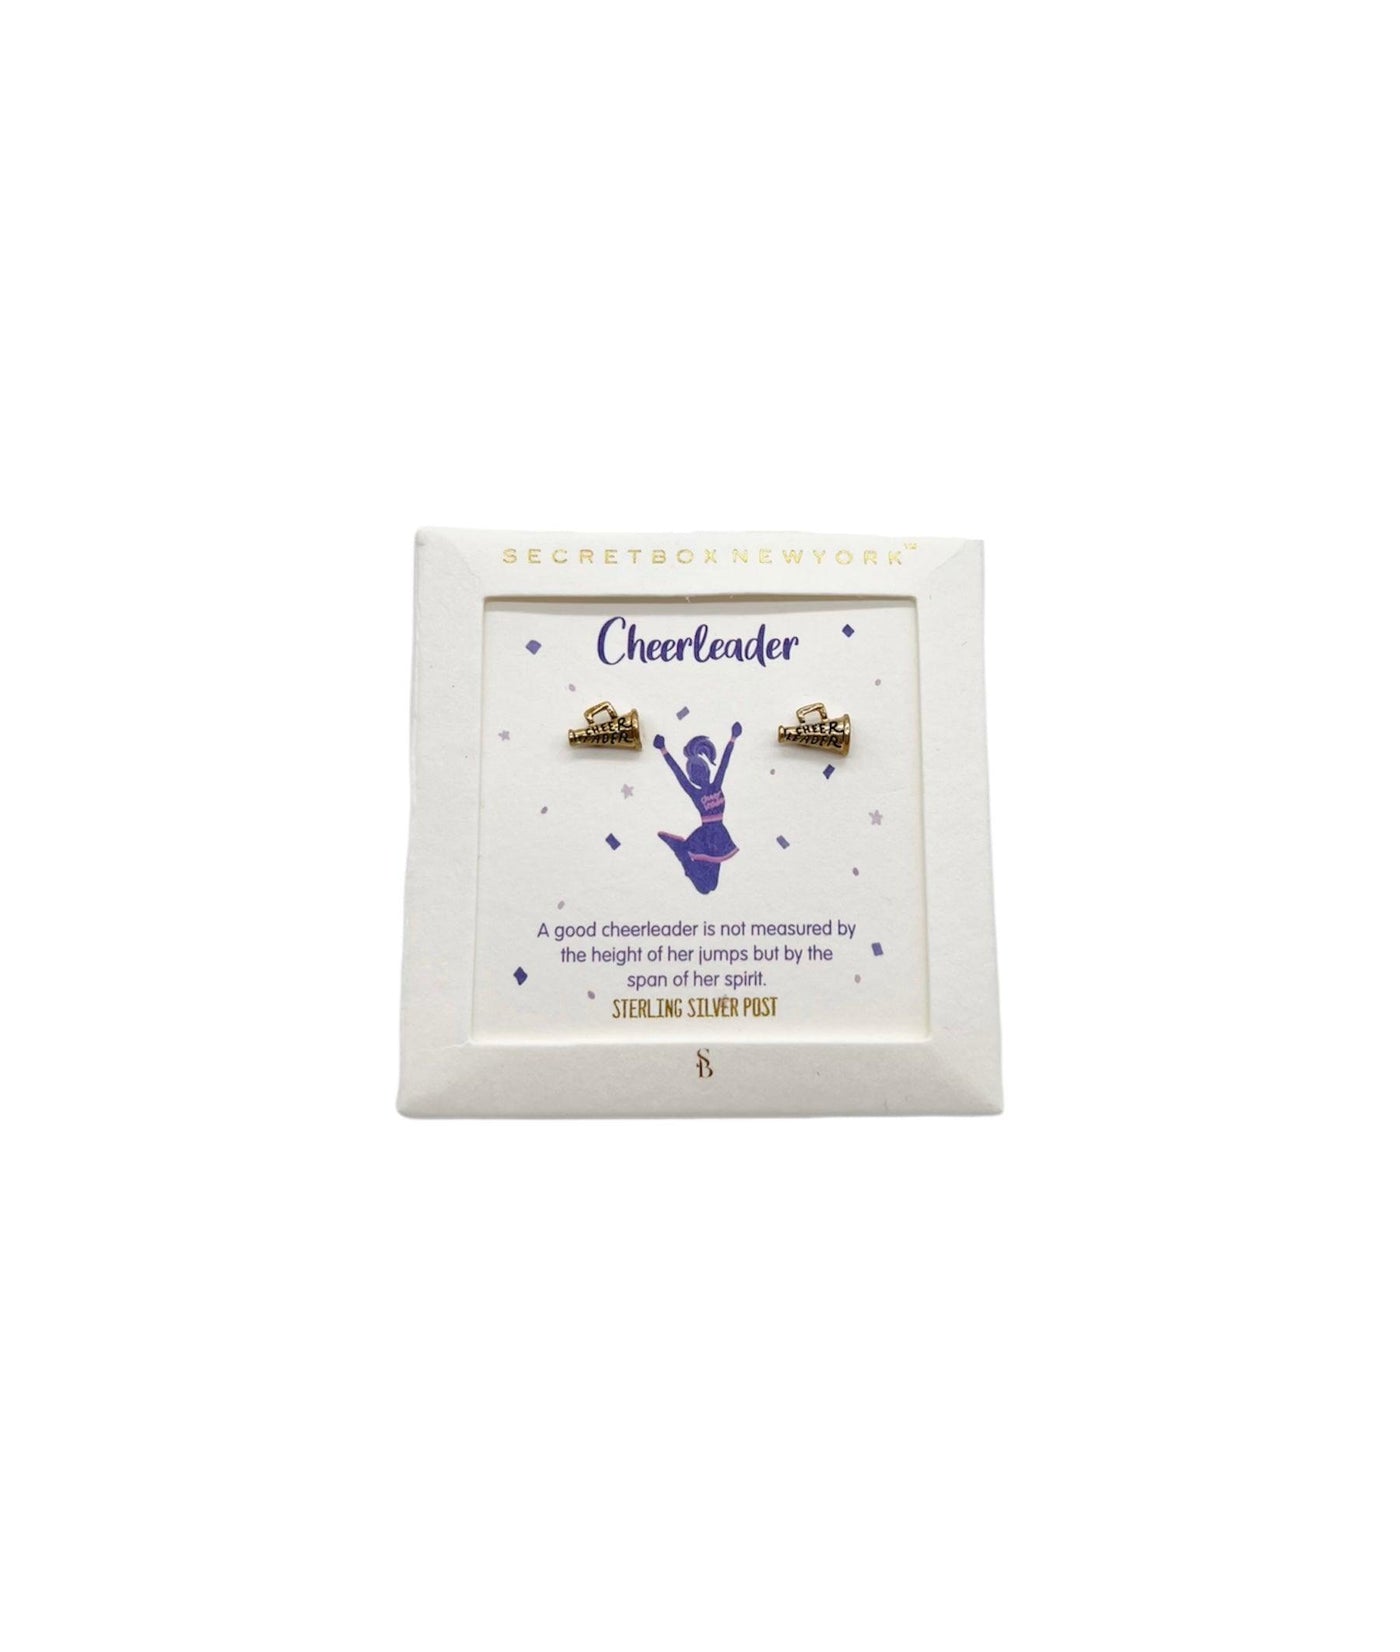 Gold megaphone stud earrings with "cheer leader" inscribed in a gift box